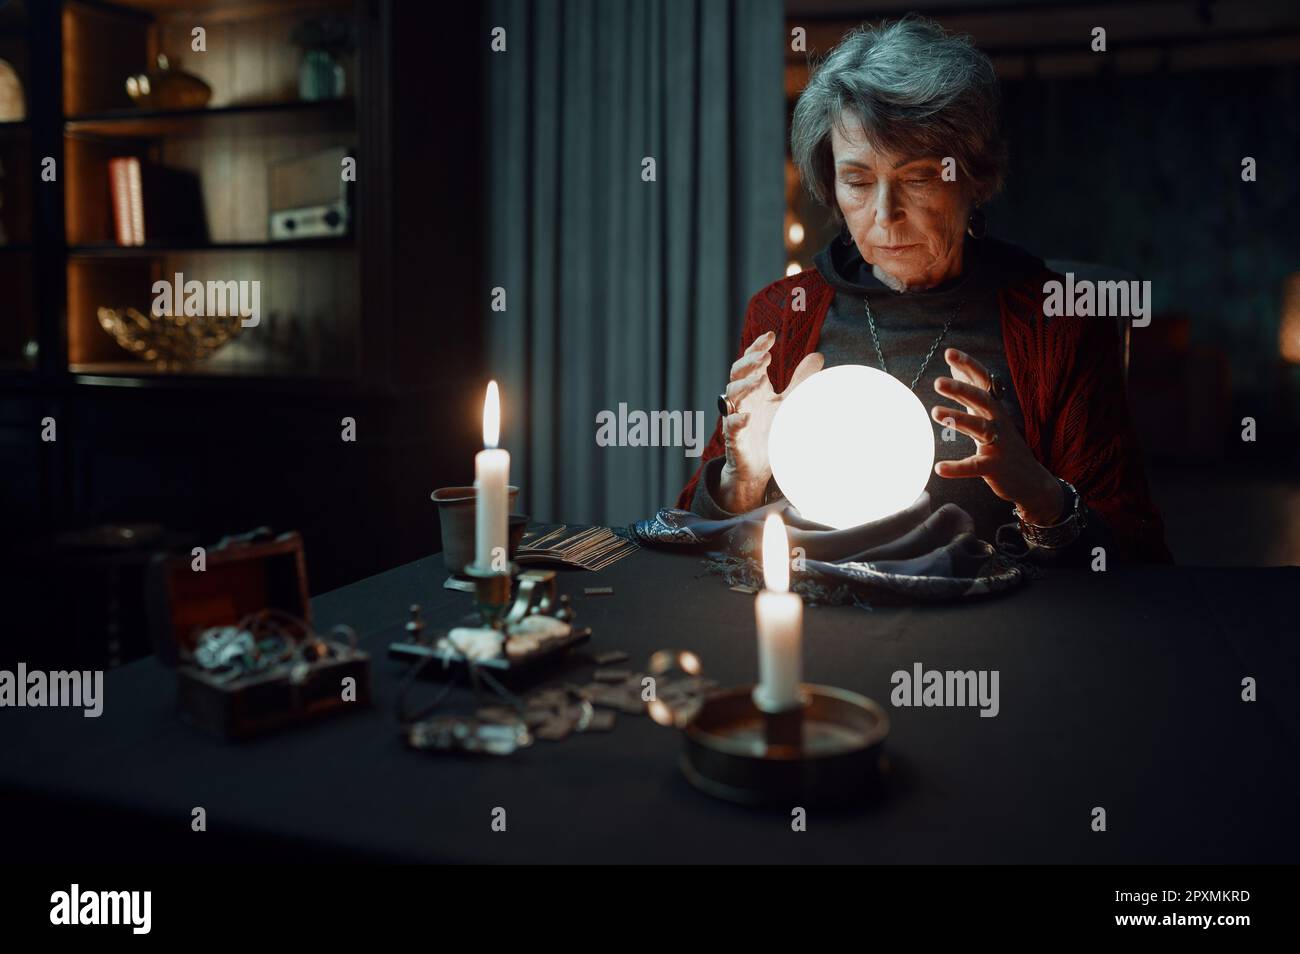 Confident witch fortune teller doing predictions with illuminated crystal ball reading future during esoteric ritual and divination seance Stock Photo